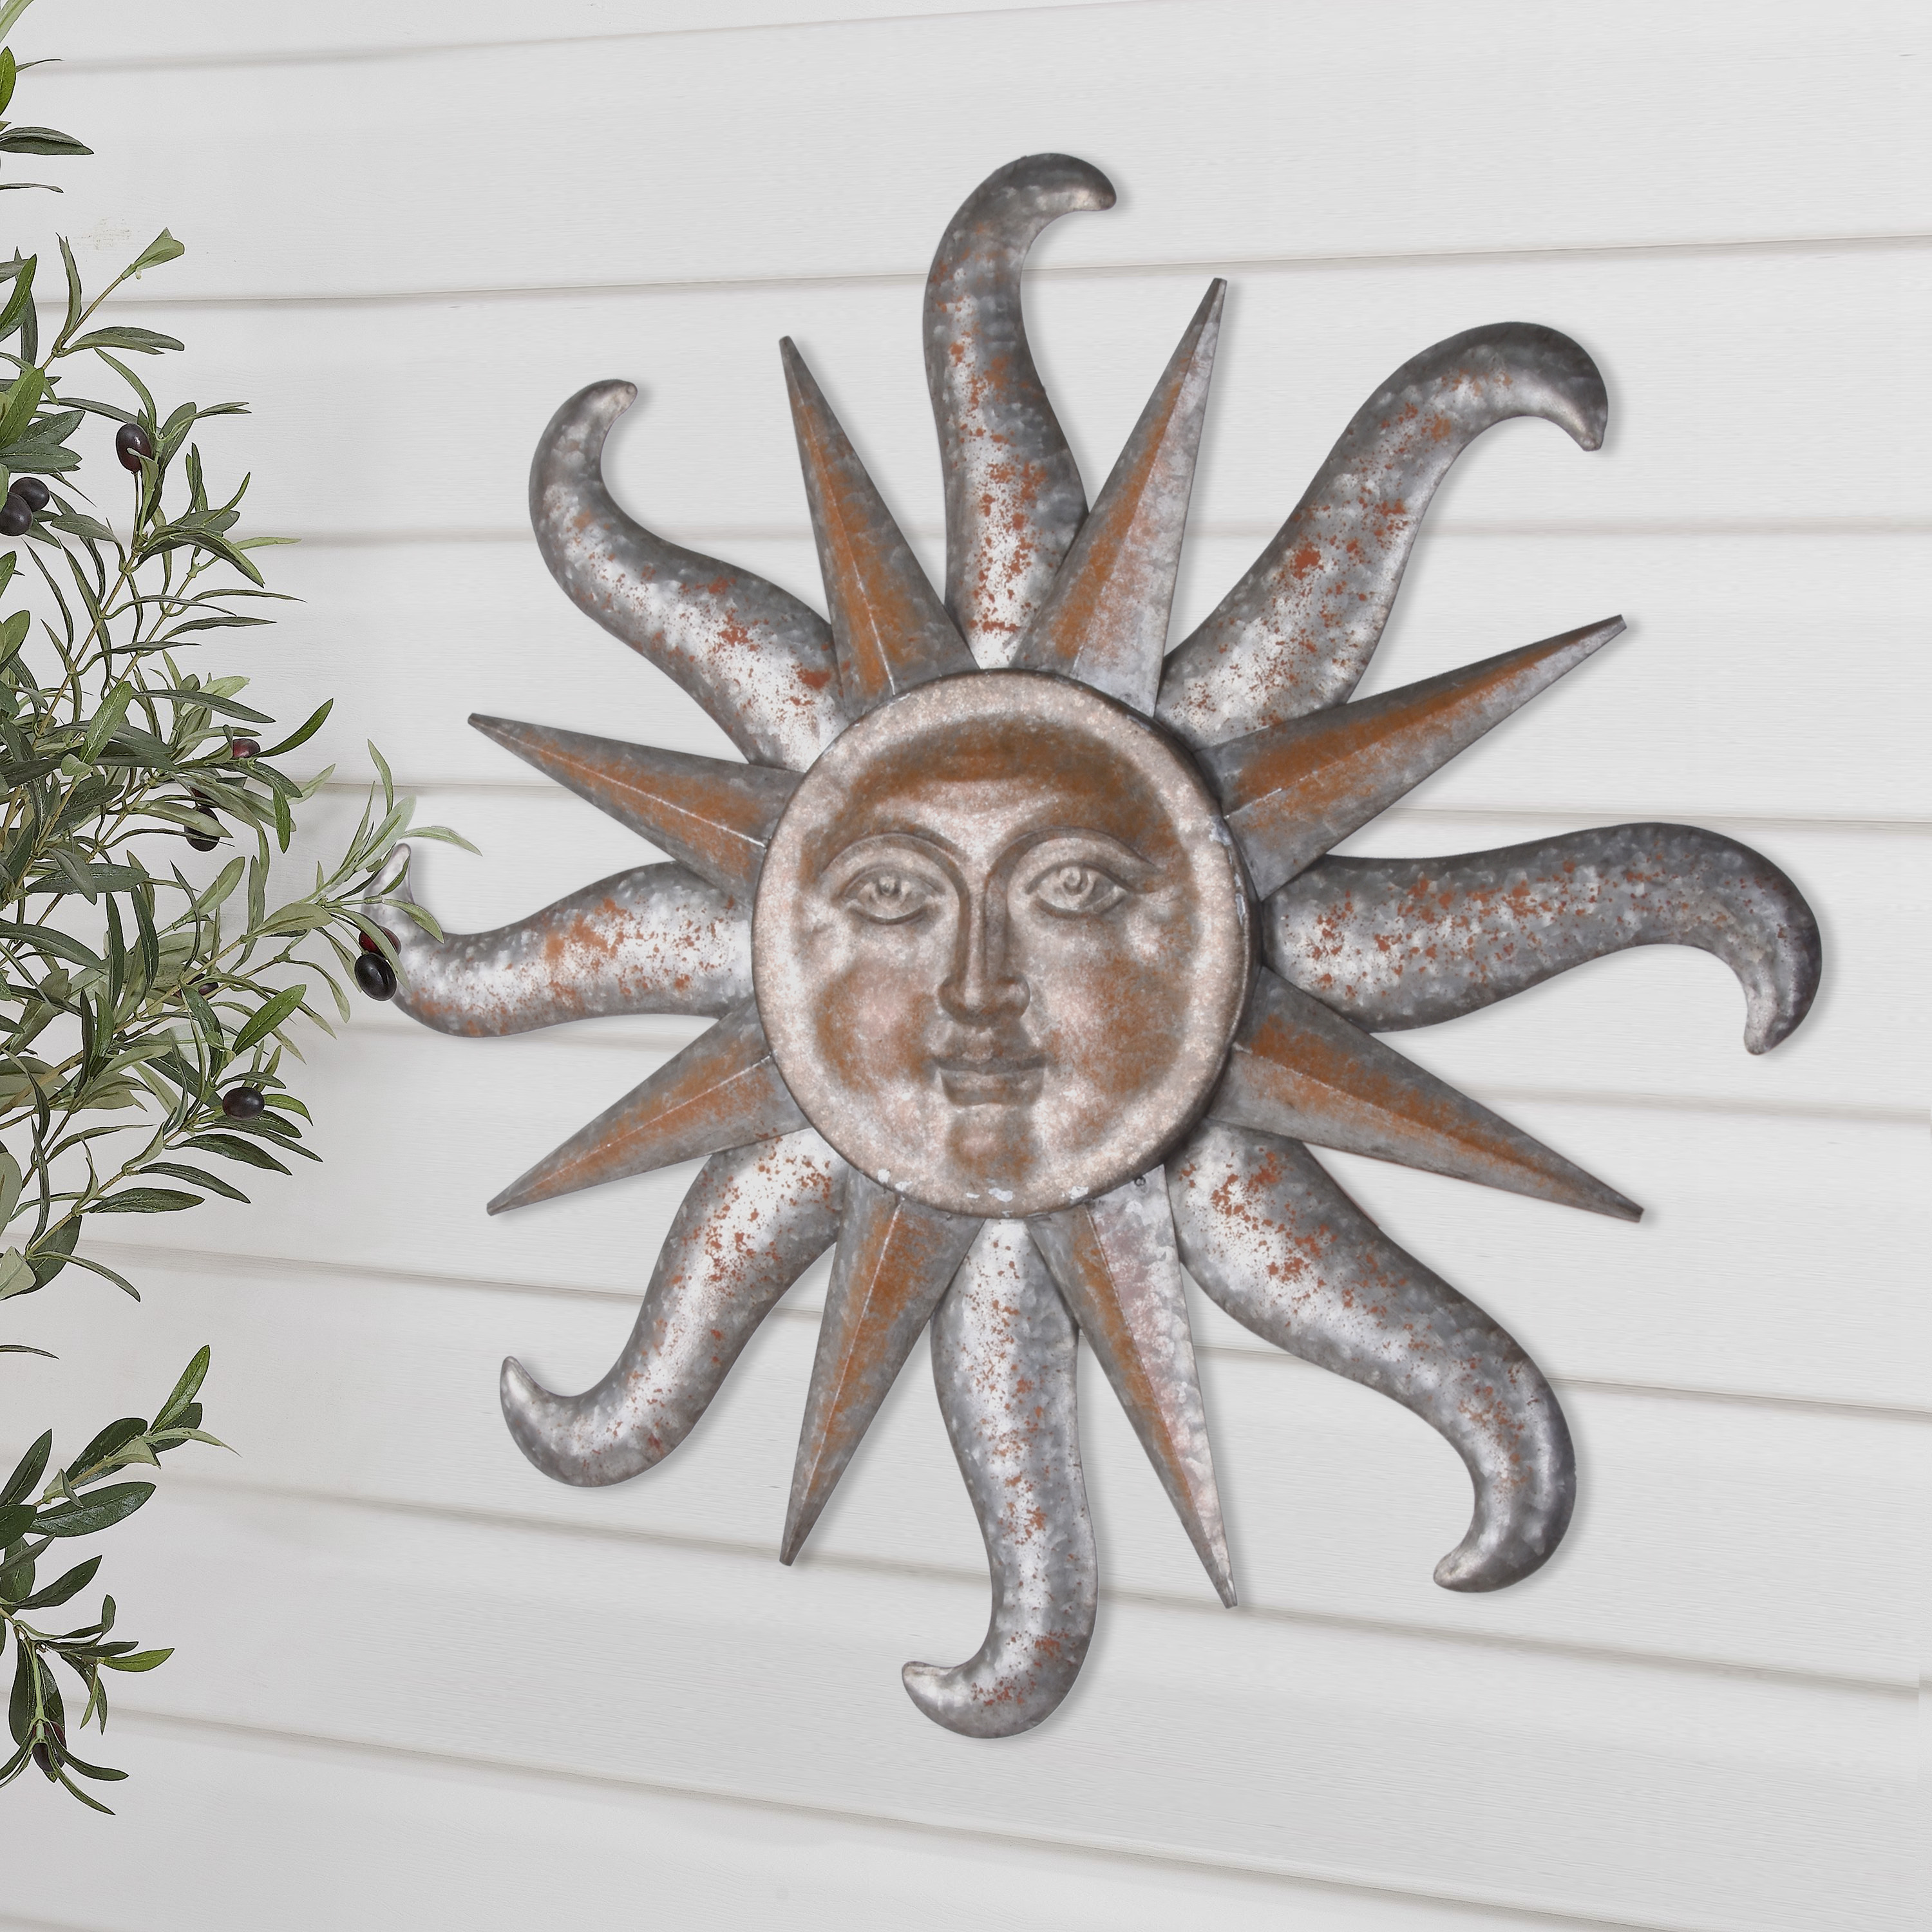 Better Homes & Gardens Outdoor Decorative Brown Metal Soleil Wall Pediment - image 1 of 8